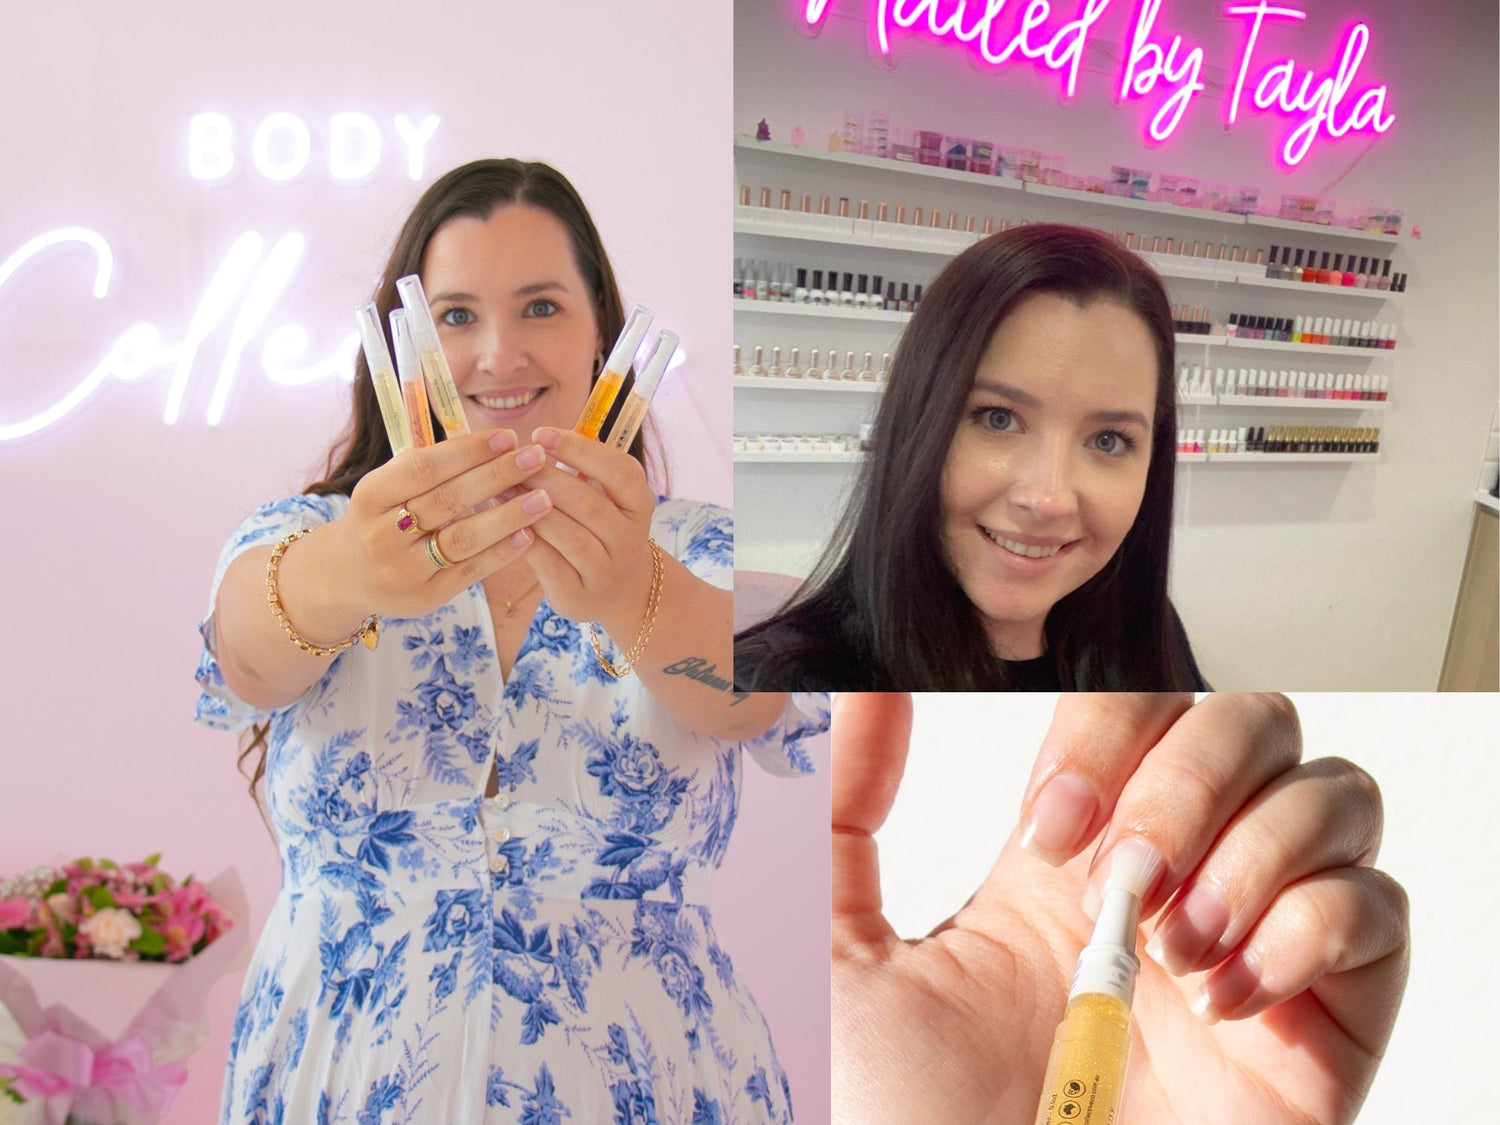 Ex-nail tech’s journey to creating Australia’s fastest growing nail care brand